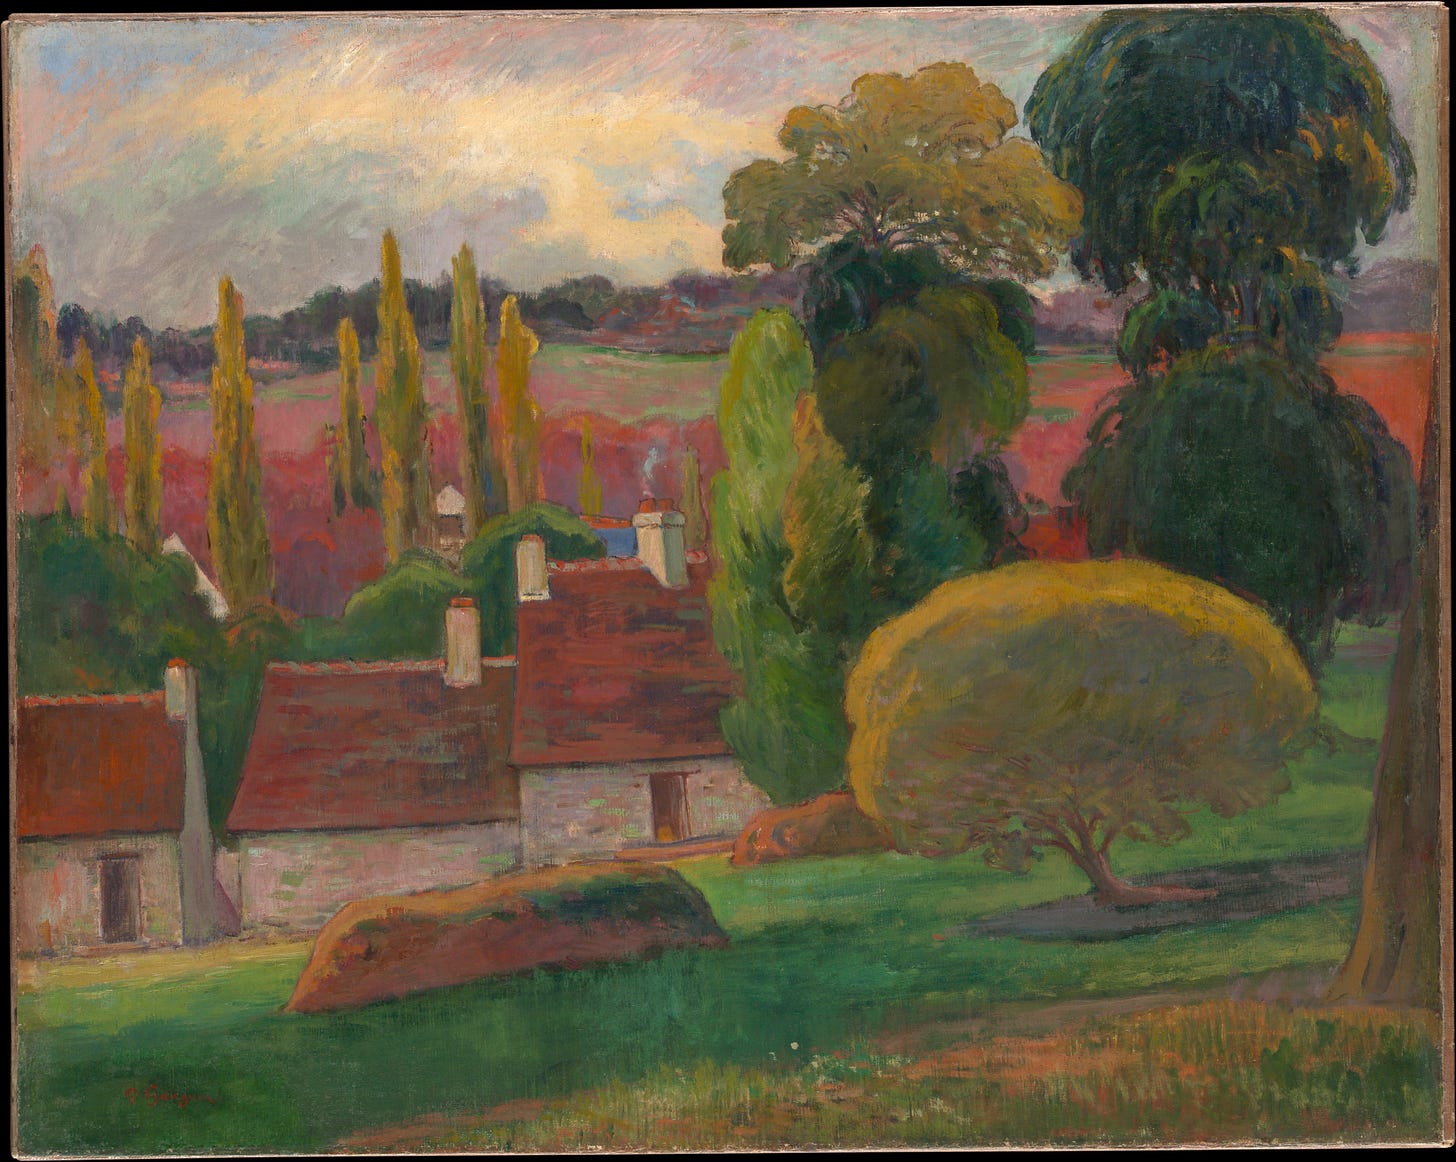 A Farm in Brittany ca. 1894 by Paul Gauguin.